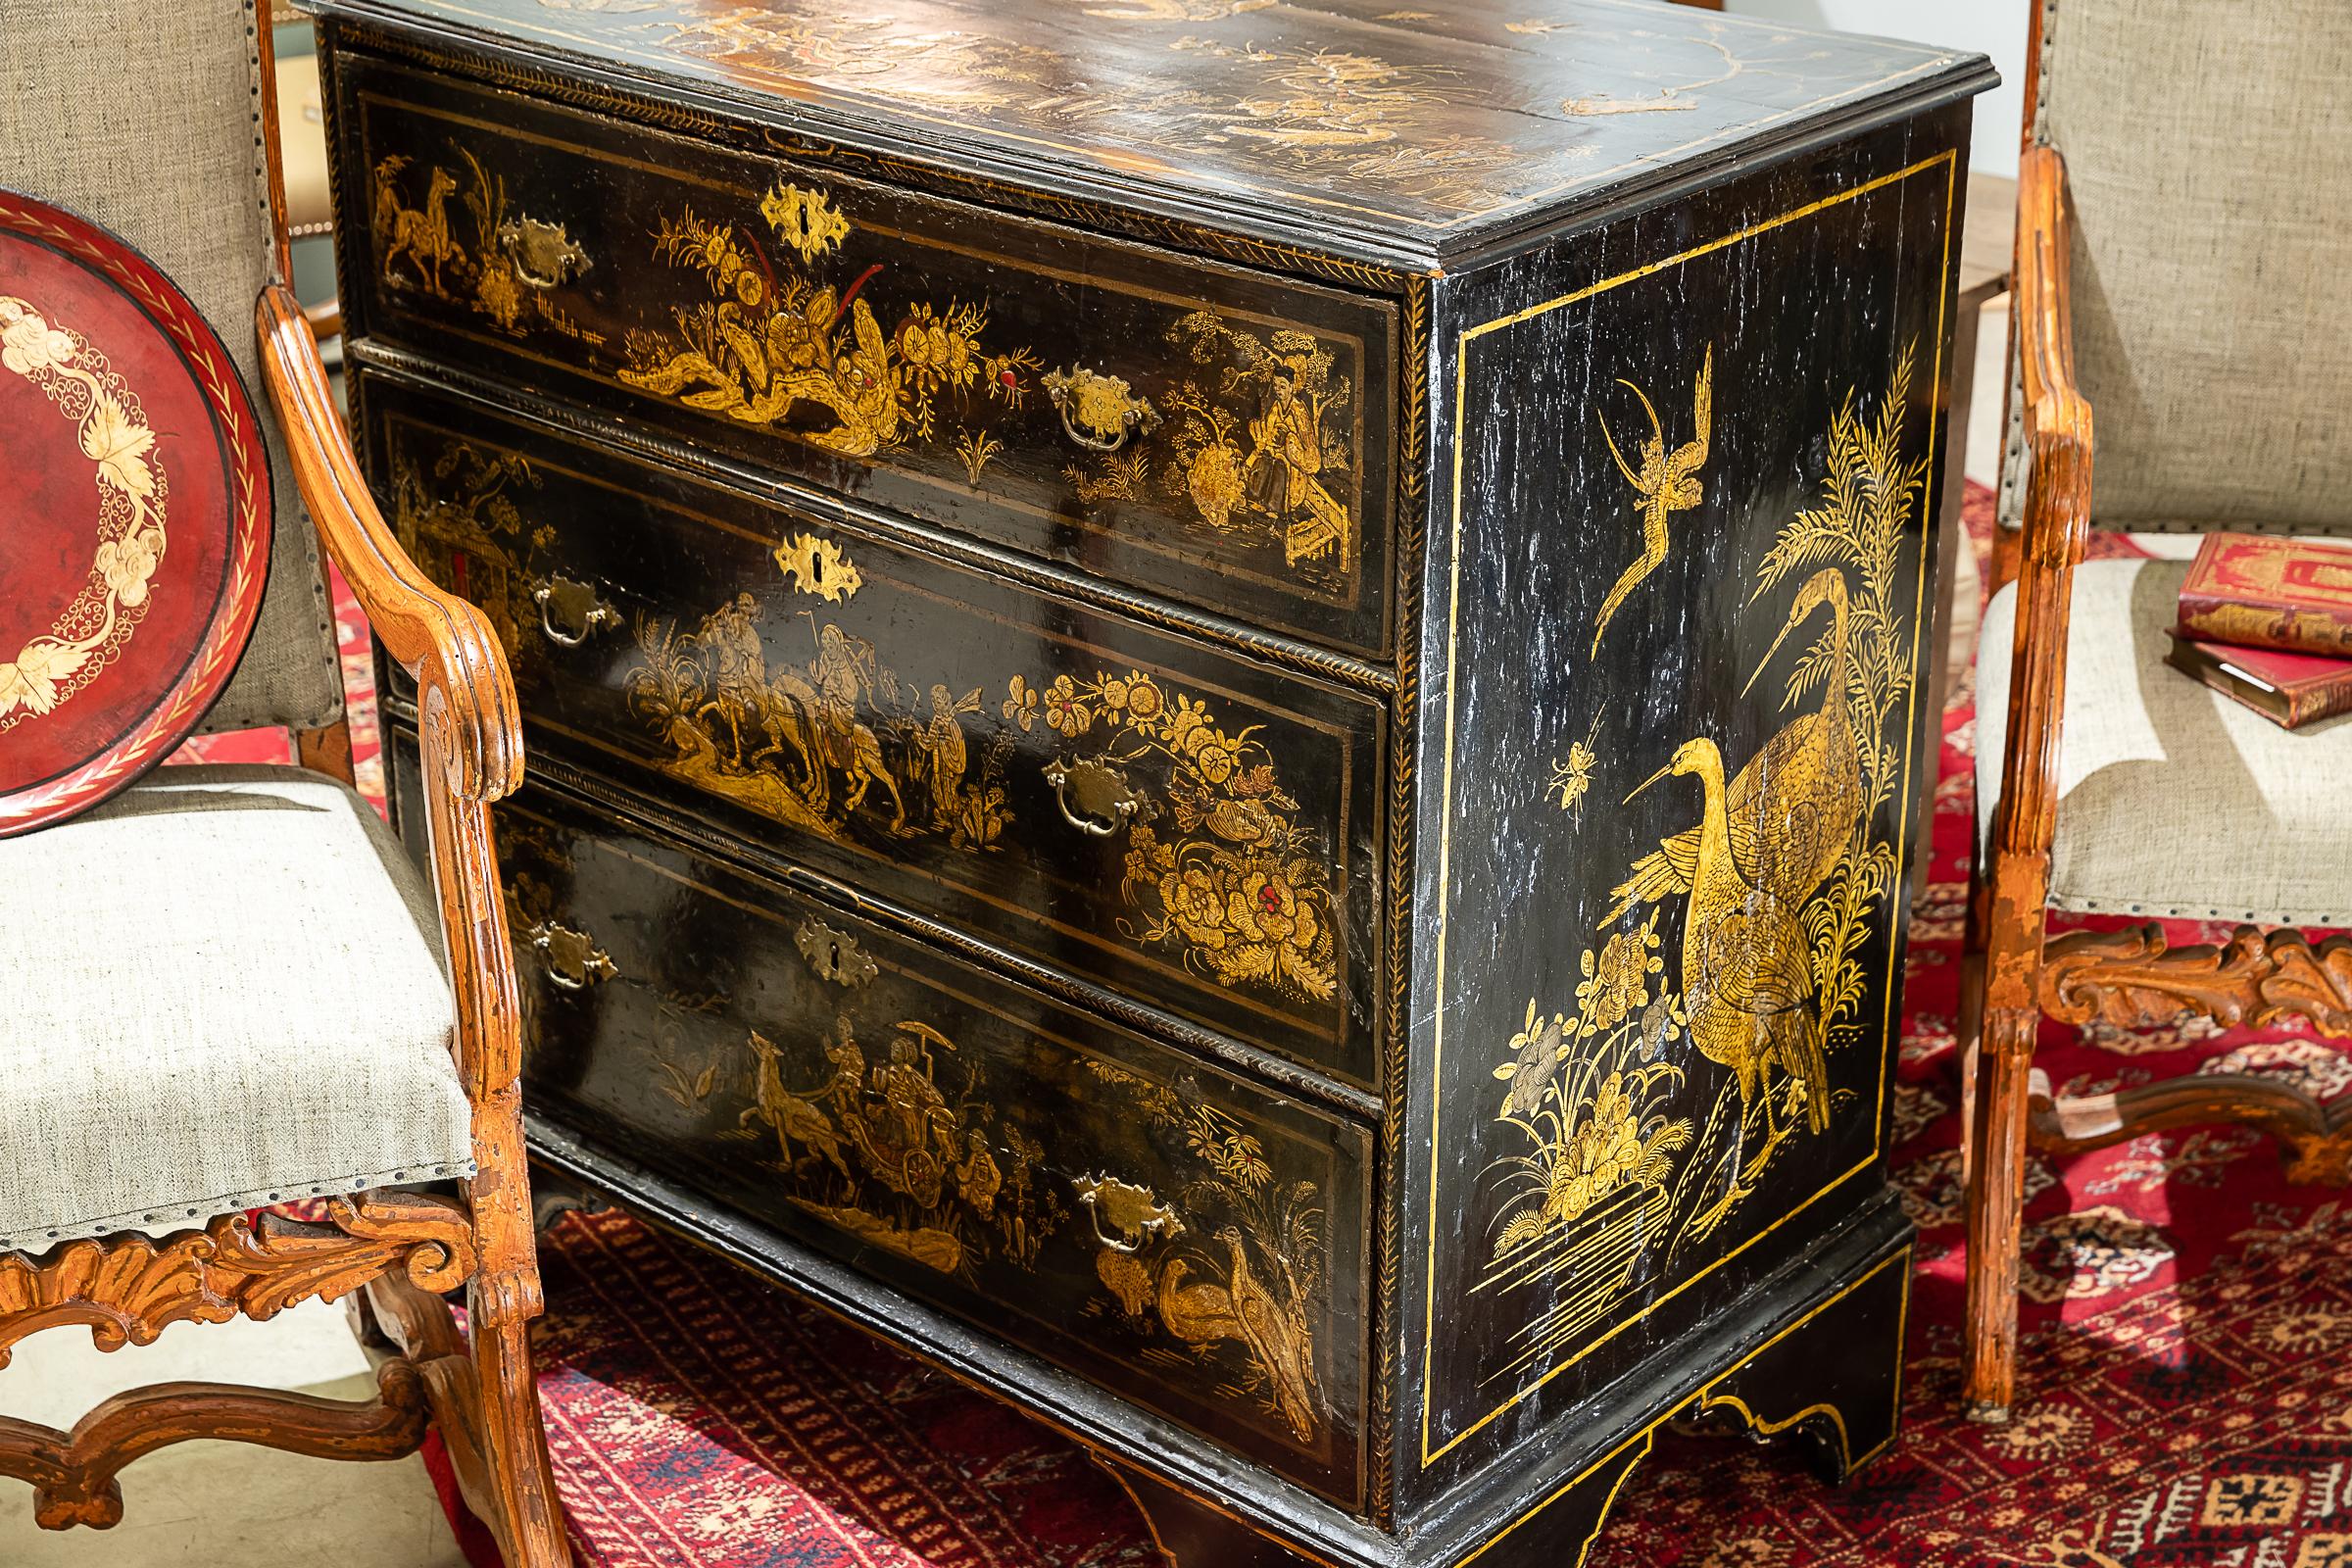 18th century English Japanned 3-drawer chest with raised lacquer decoration of fanciful and exotic scenes comprised of fanciful birds, animals, and persons. Old, if not original, hardware including drawer locks.